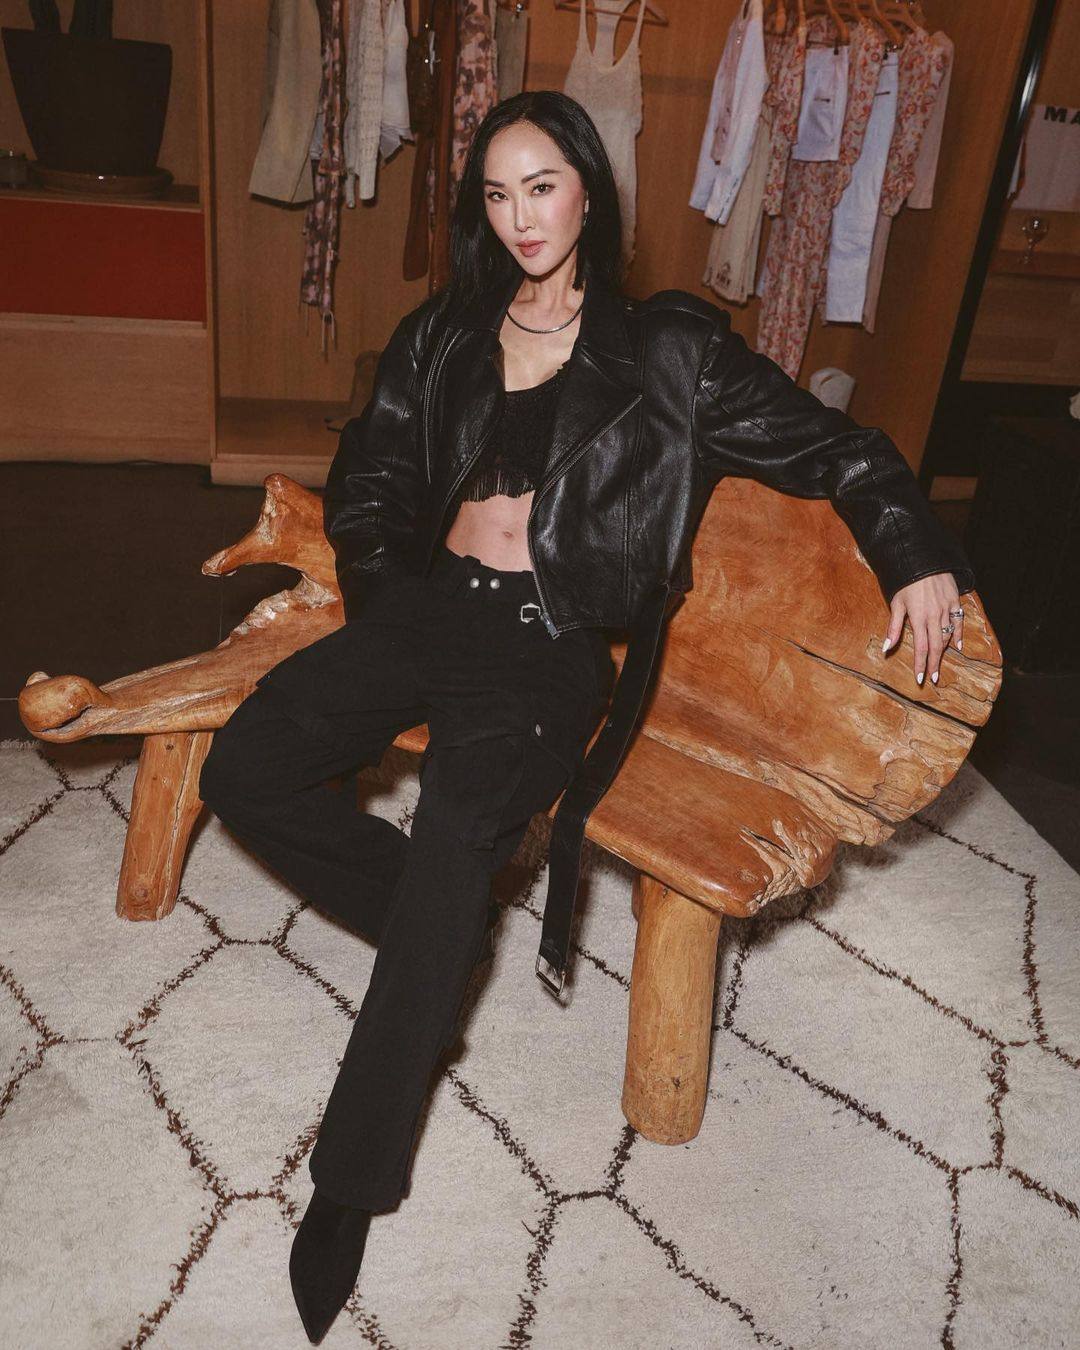 Chriselle Lim is considered one of the OG influencers of this generation. Photo: @chrisellelim/Instagram